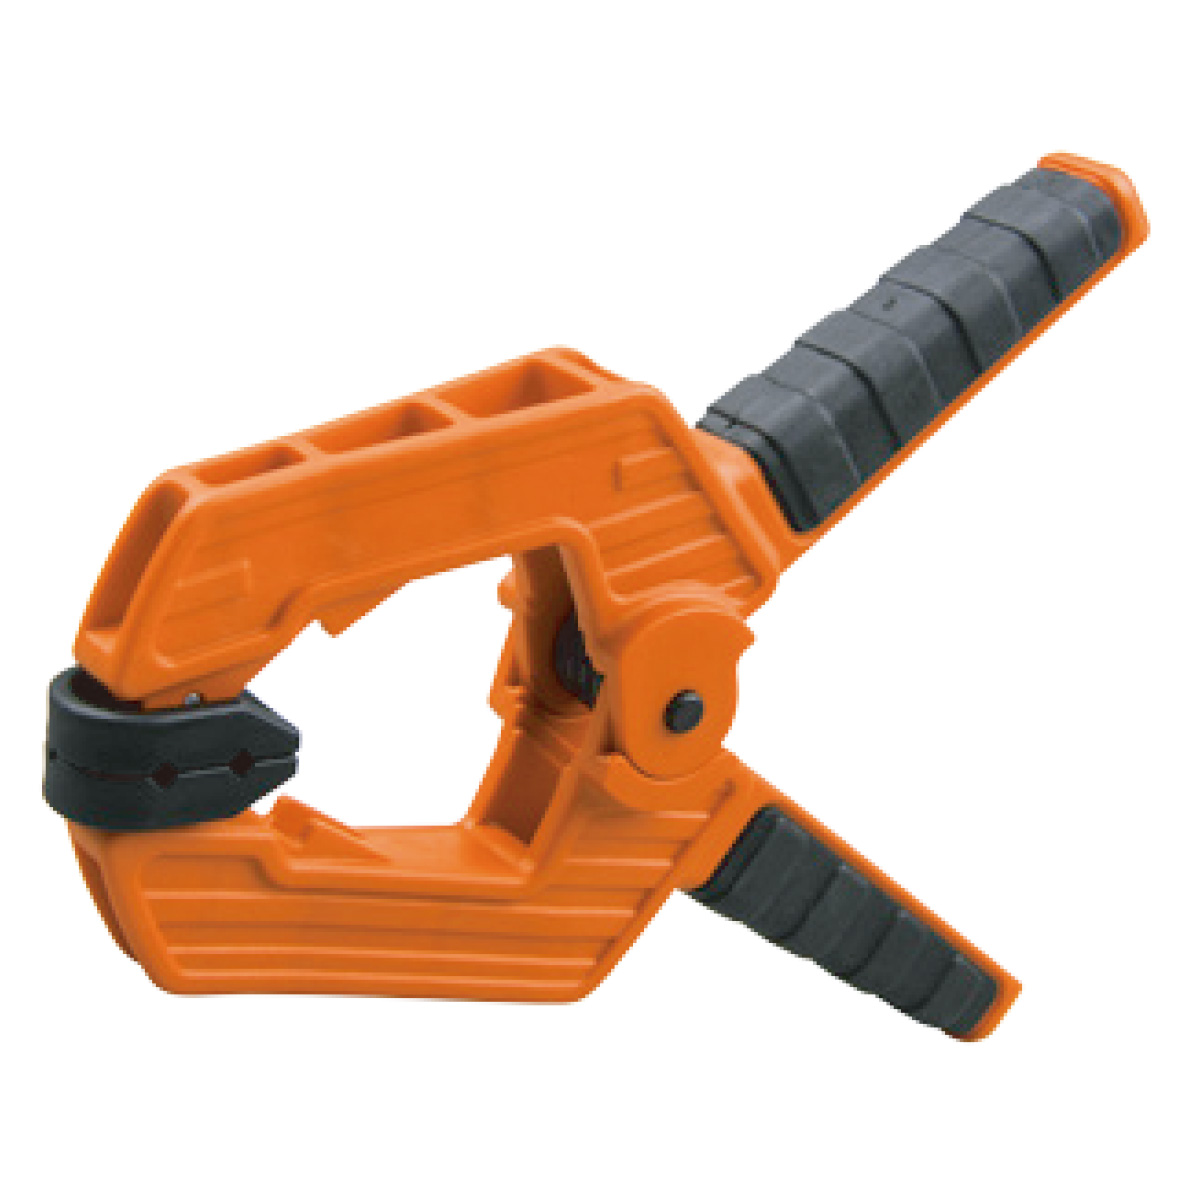 QUICK RELEASK CLAMP